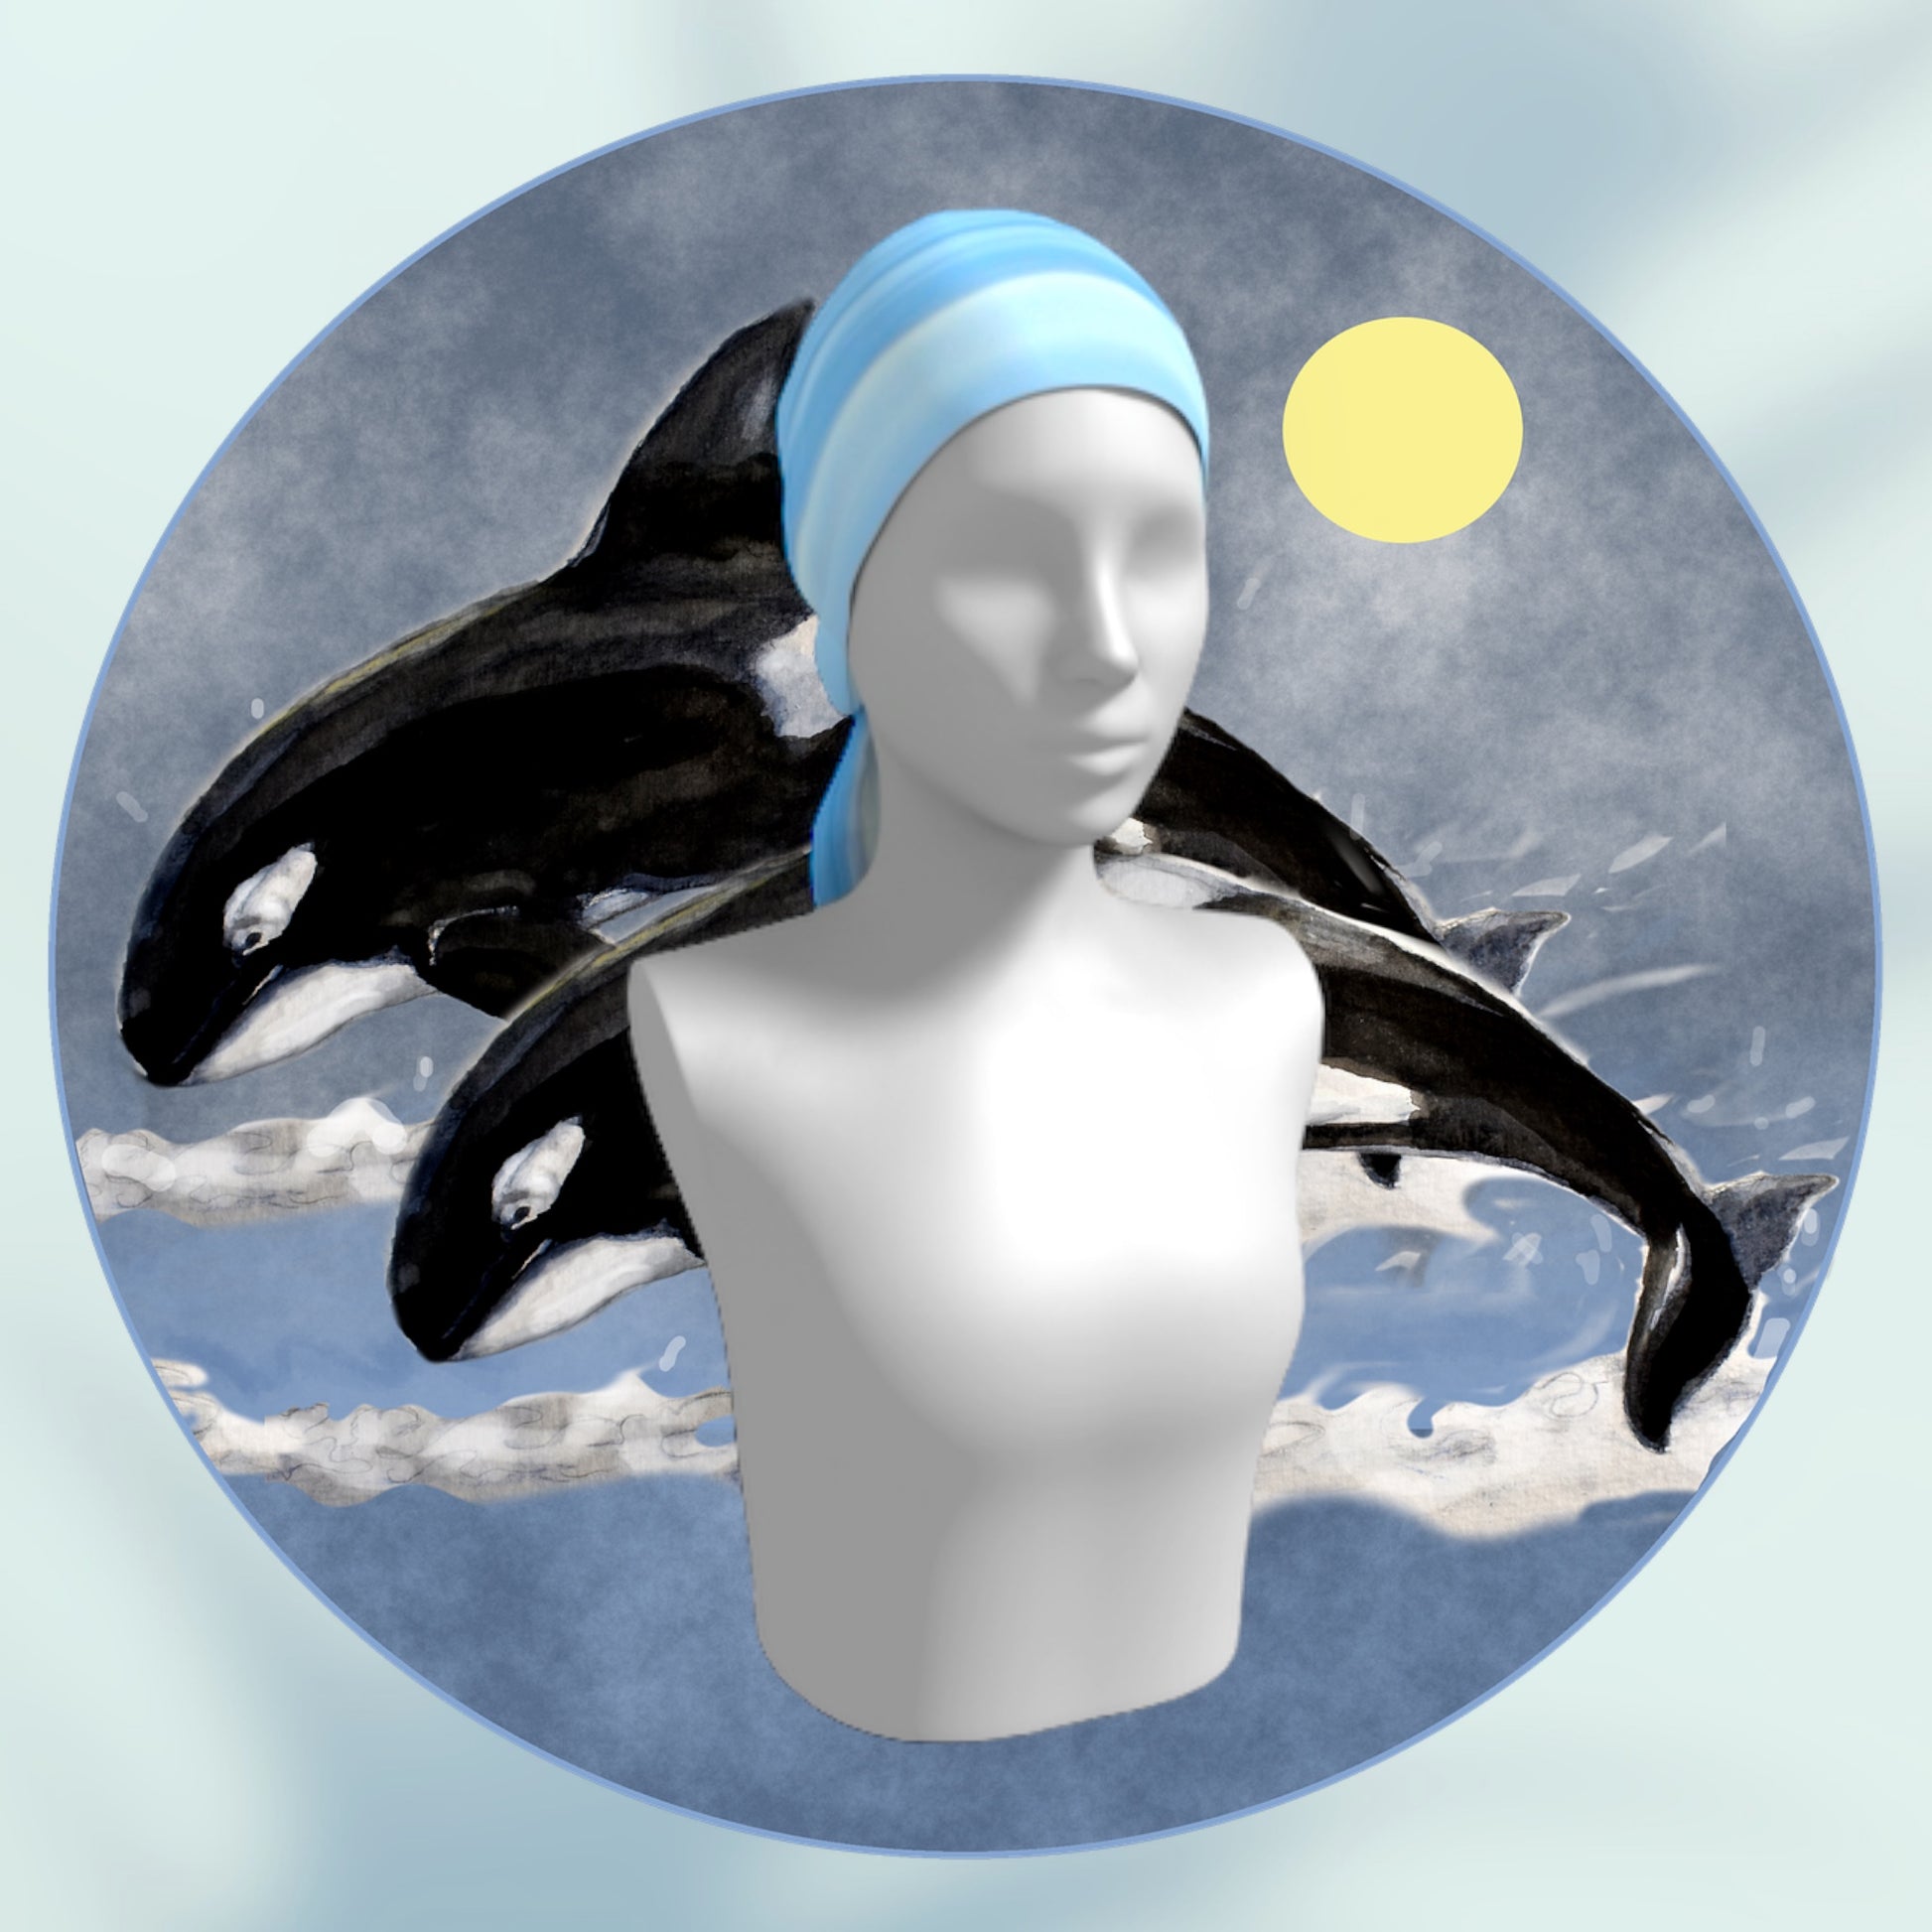 Ocean blue horizon long scarf is shown worn as a head wrap and two orcas are behind the manniquin.